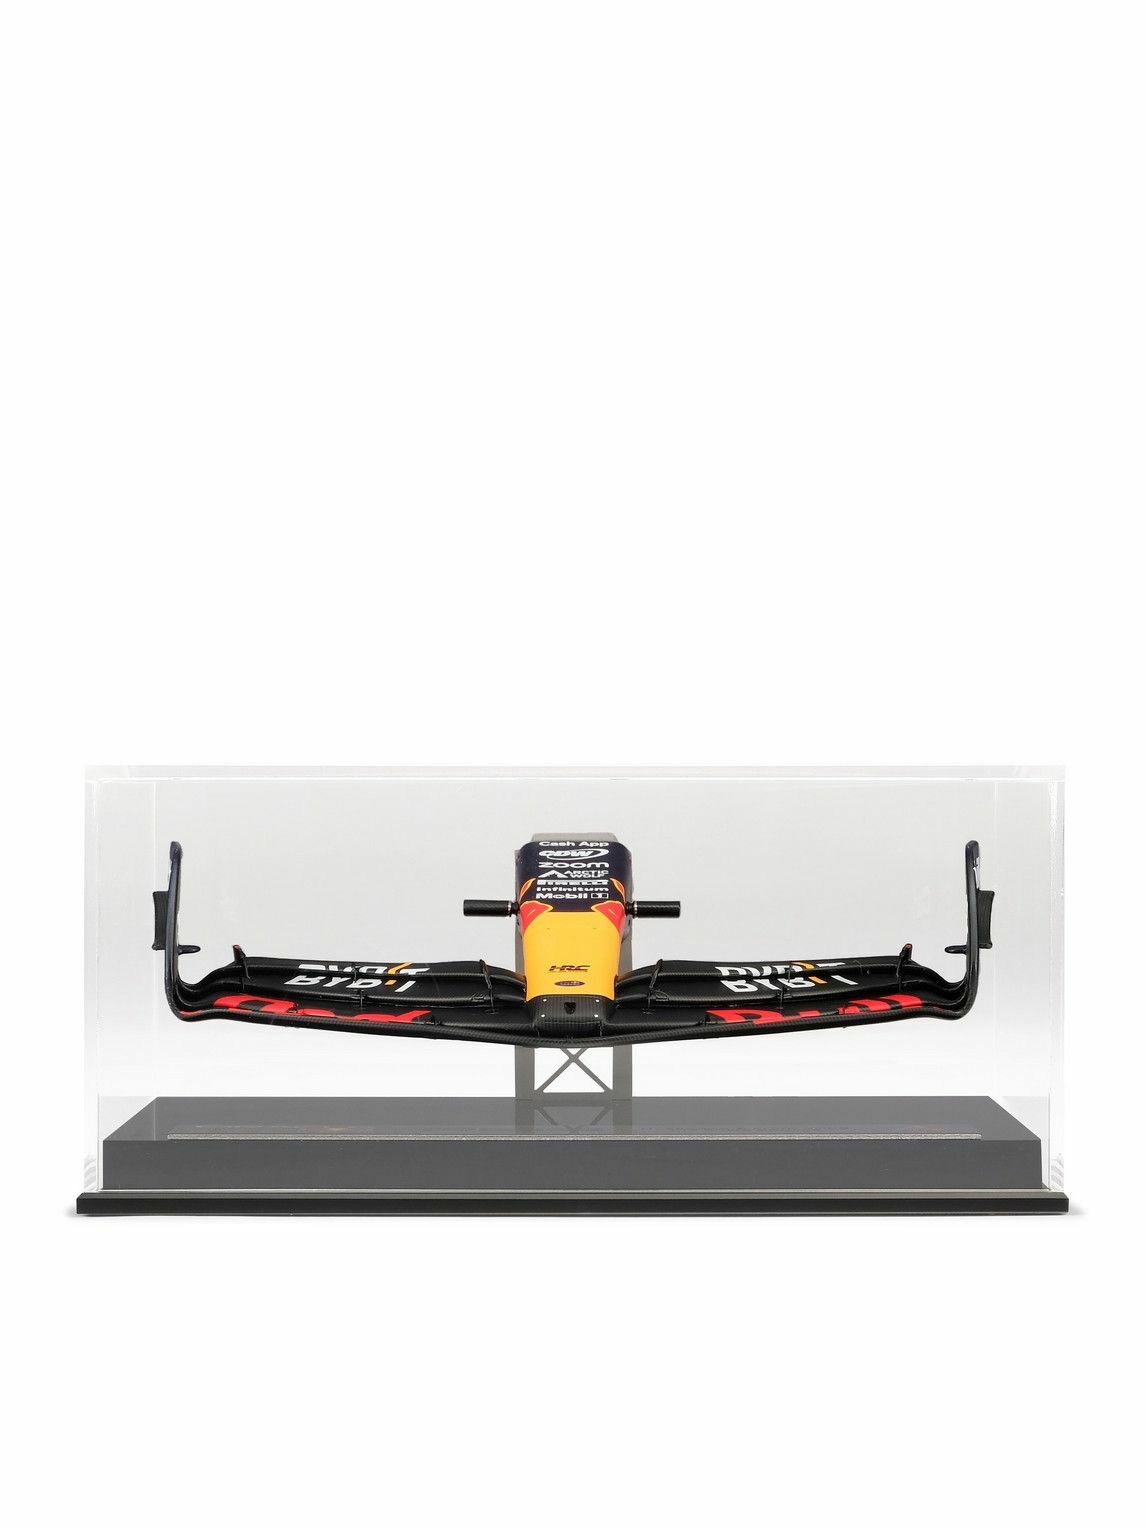 Photo: Amalgam Collection - Oracle Red Bull Racing RB19 Nosecone (2023) 1:12 Model Car